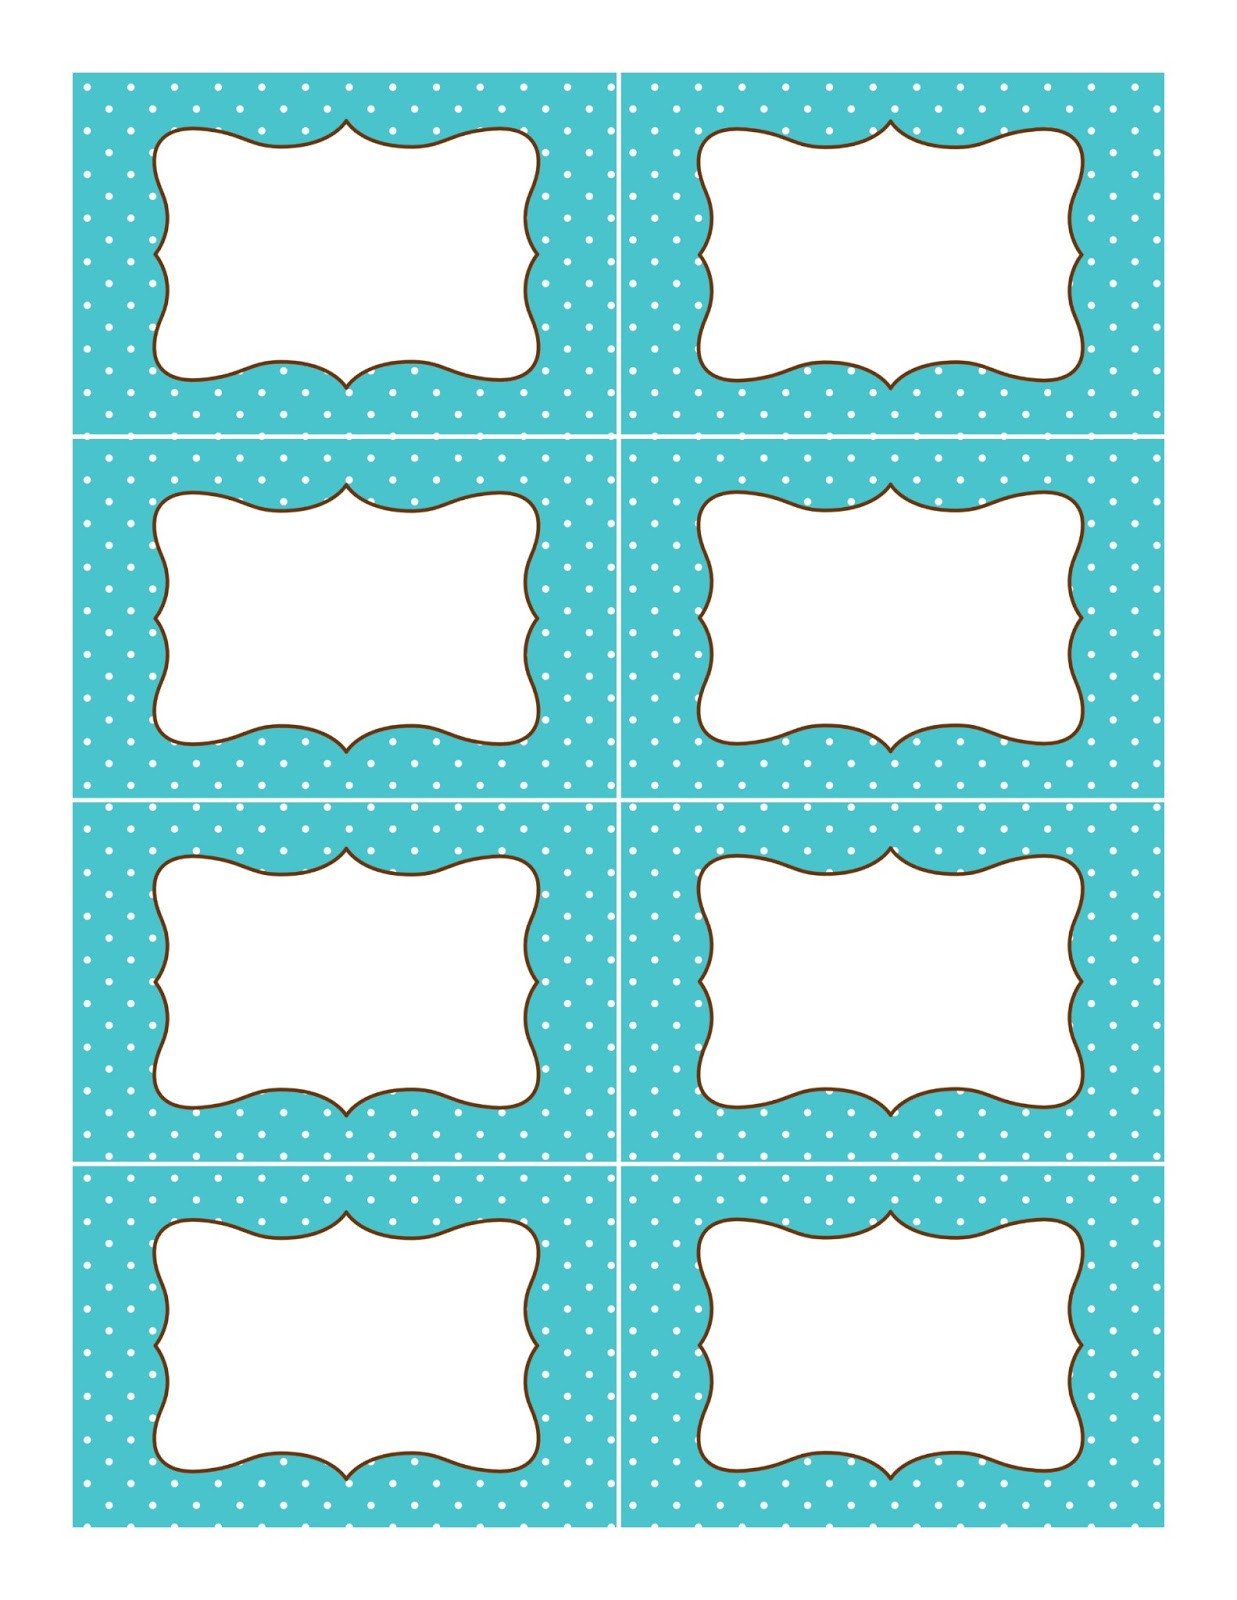 Free Printable Label Template 1000 Ideas About Polka Dot Labels On Pinterest